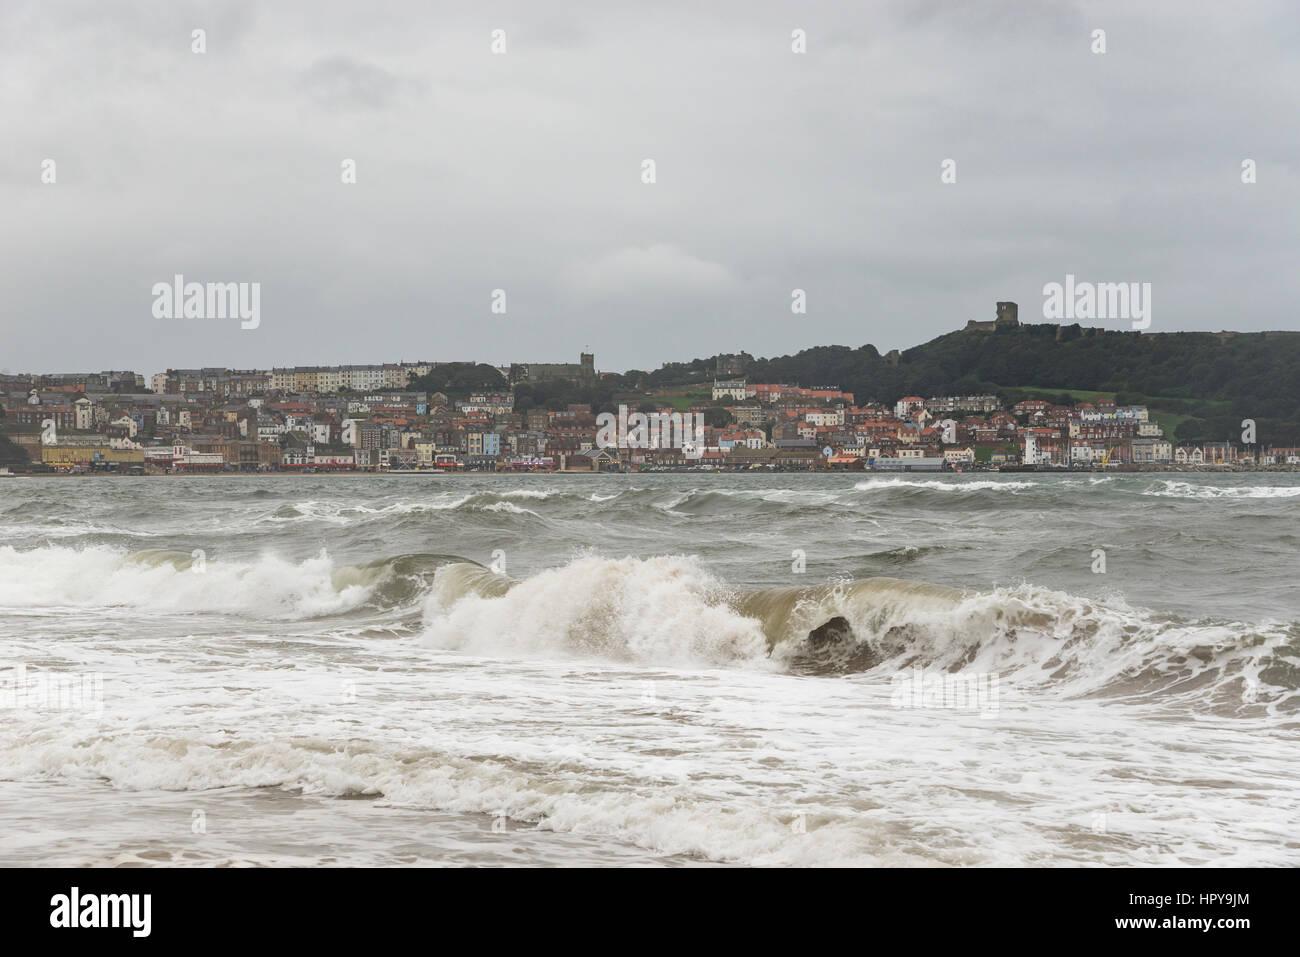 Rough sea at Scarborough, North Yorkshire on the east coast of England. View of the harbour and castle in the distance. Stock Photo